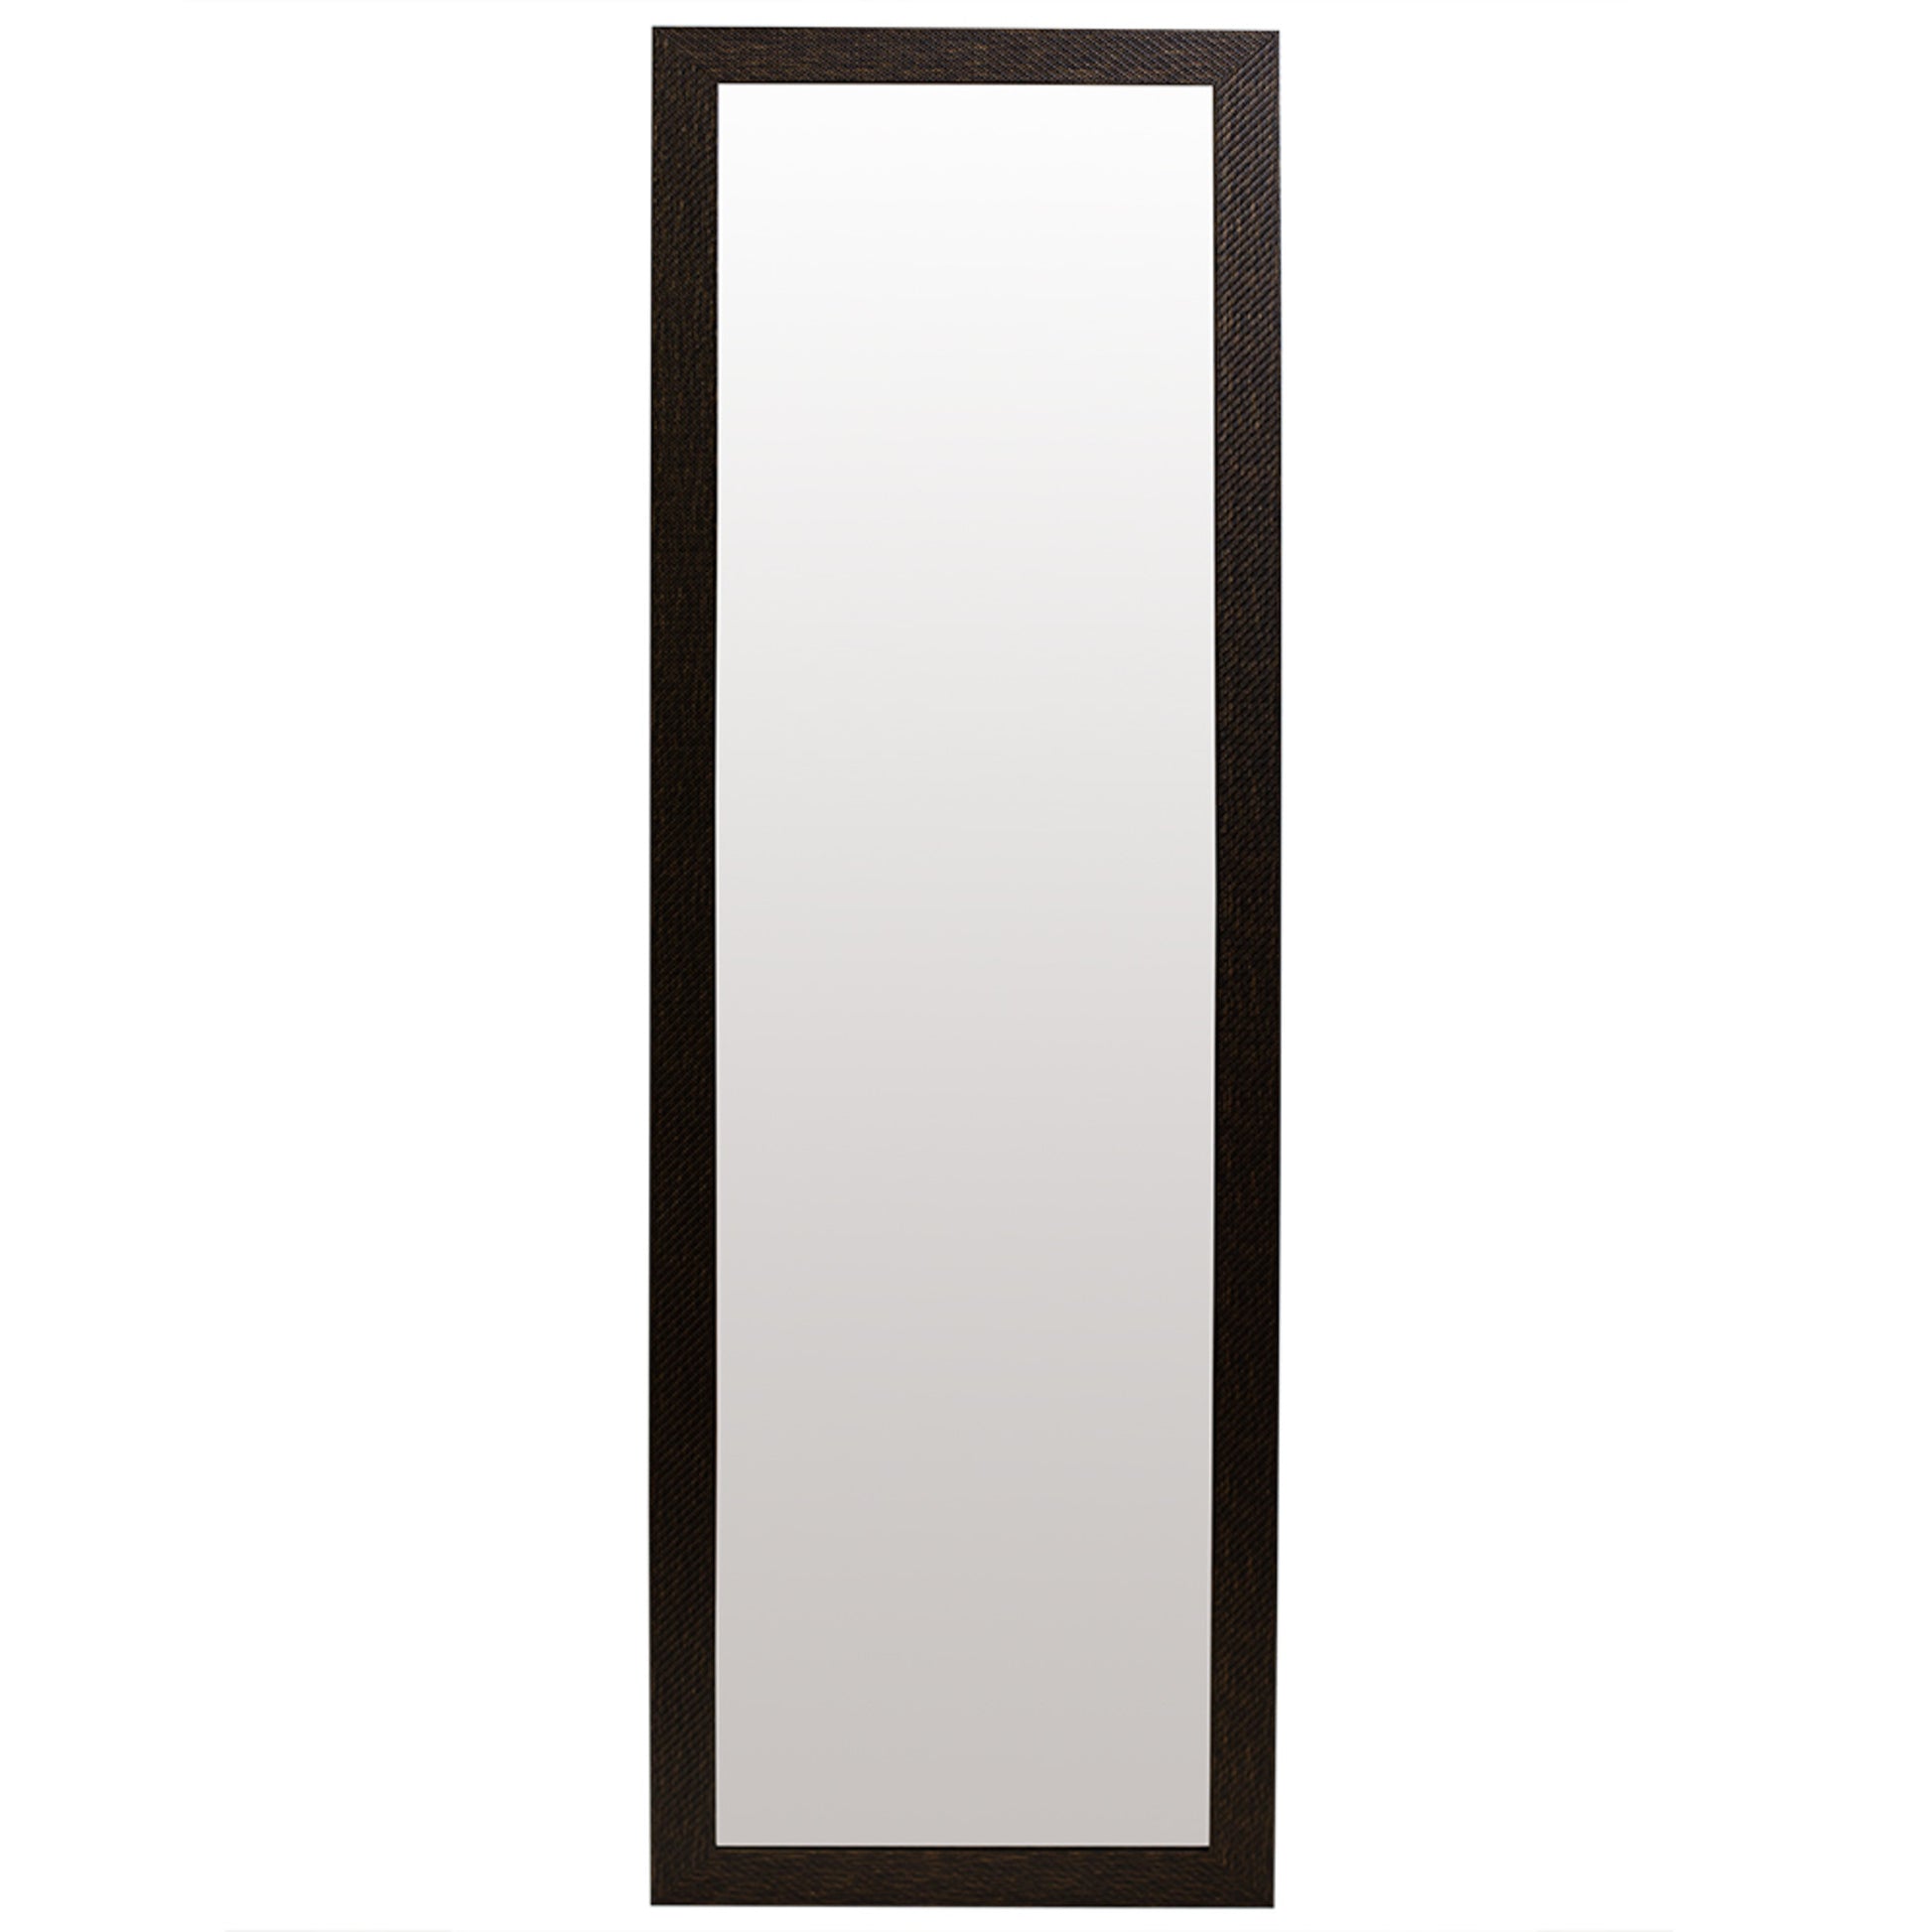 Home Basics Full Length Over the Door Mirror, Brown - Brown